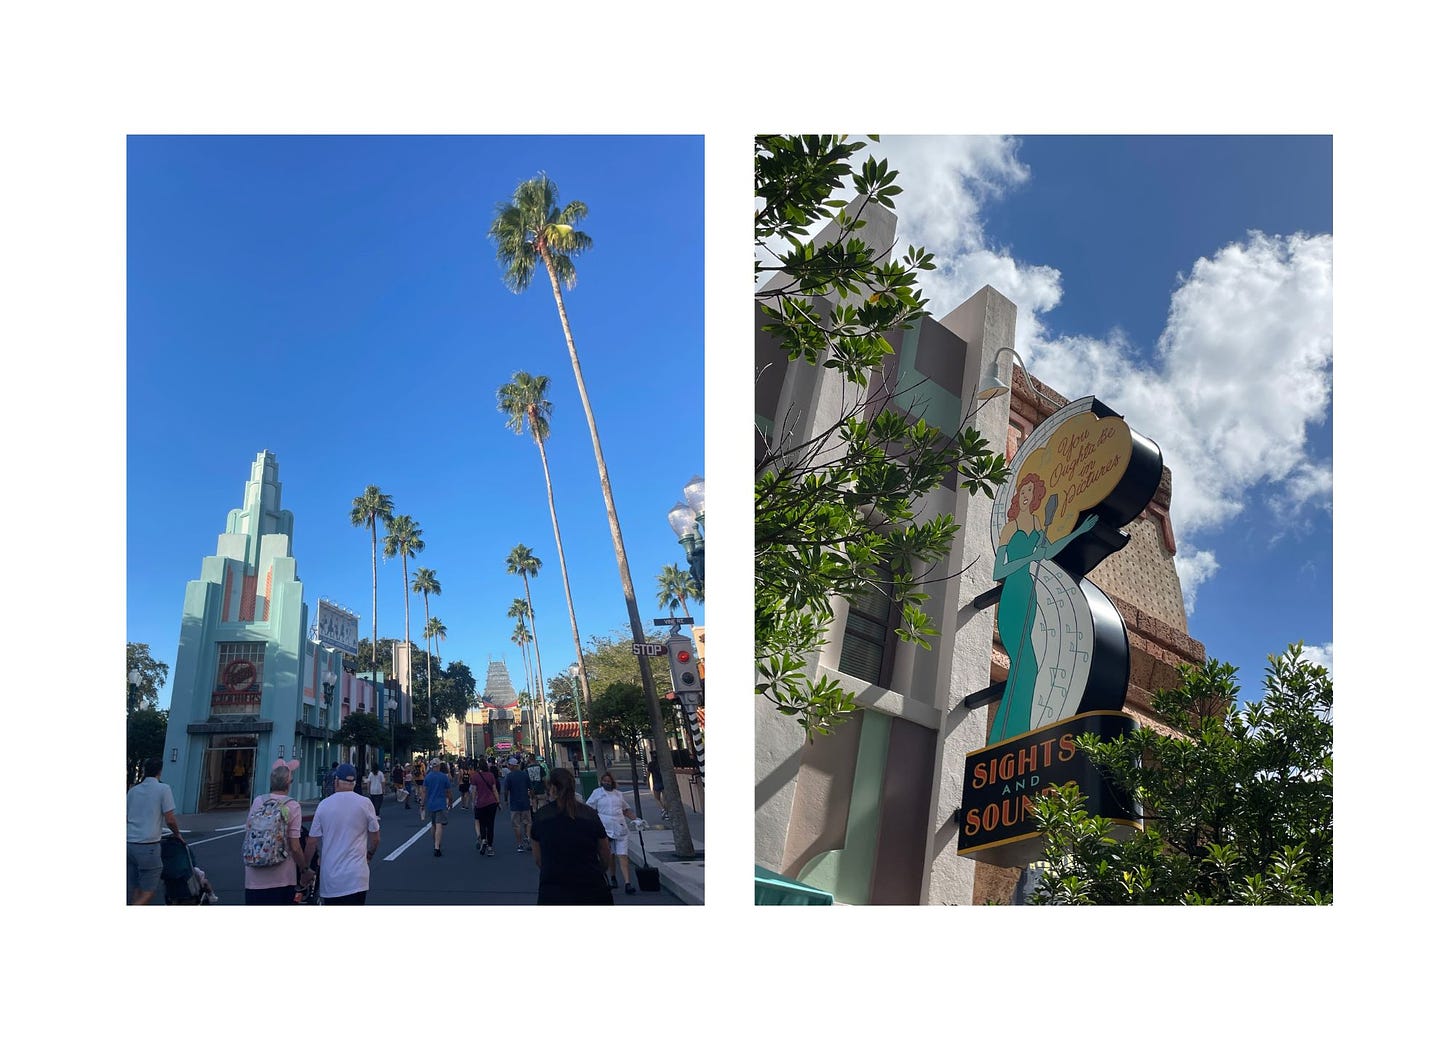 Side by side images of palm trees and a billboard at Disney's Hollywood Studios.